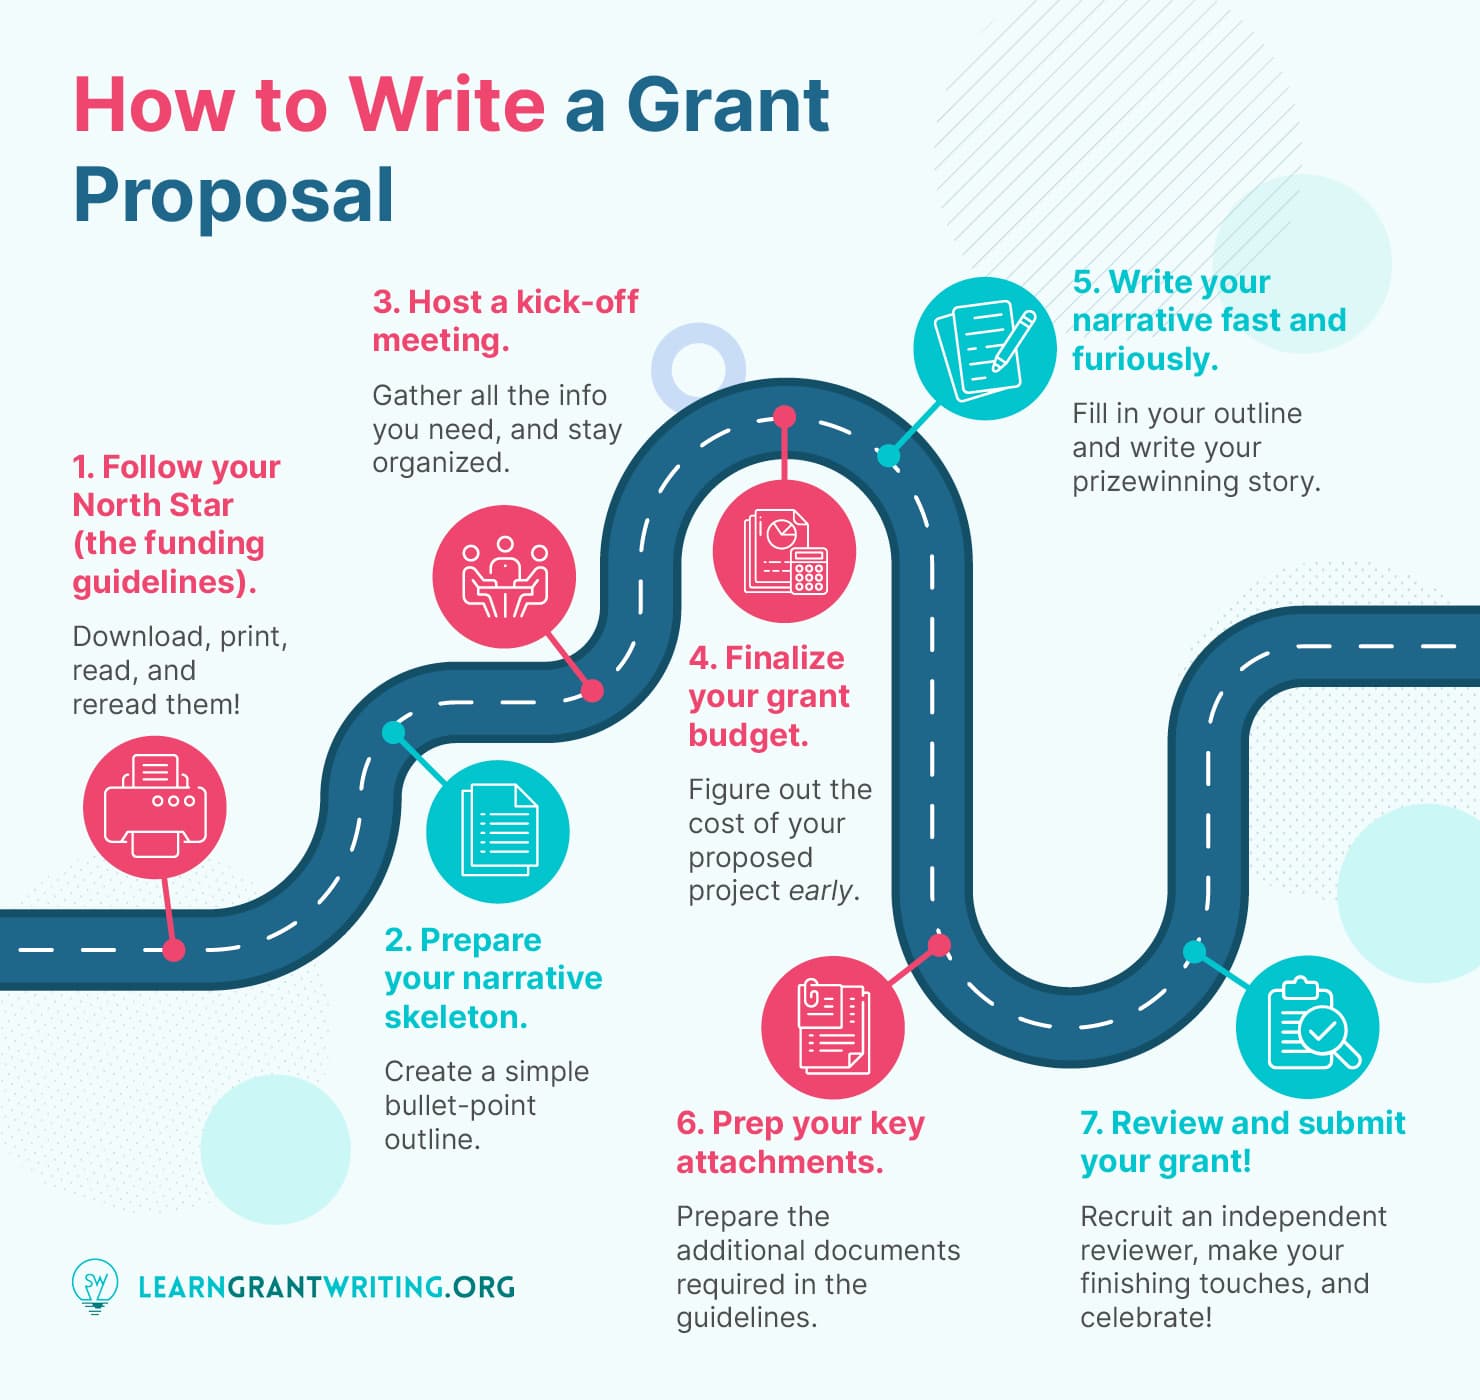 The 7-step process for how to write grant proposals for nonprofits, detailed in the text below